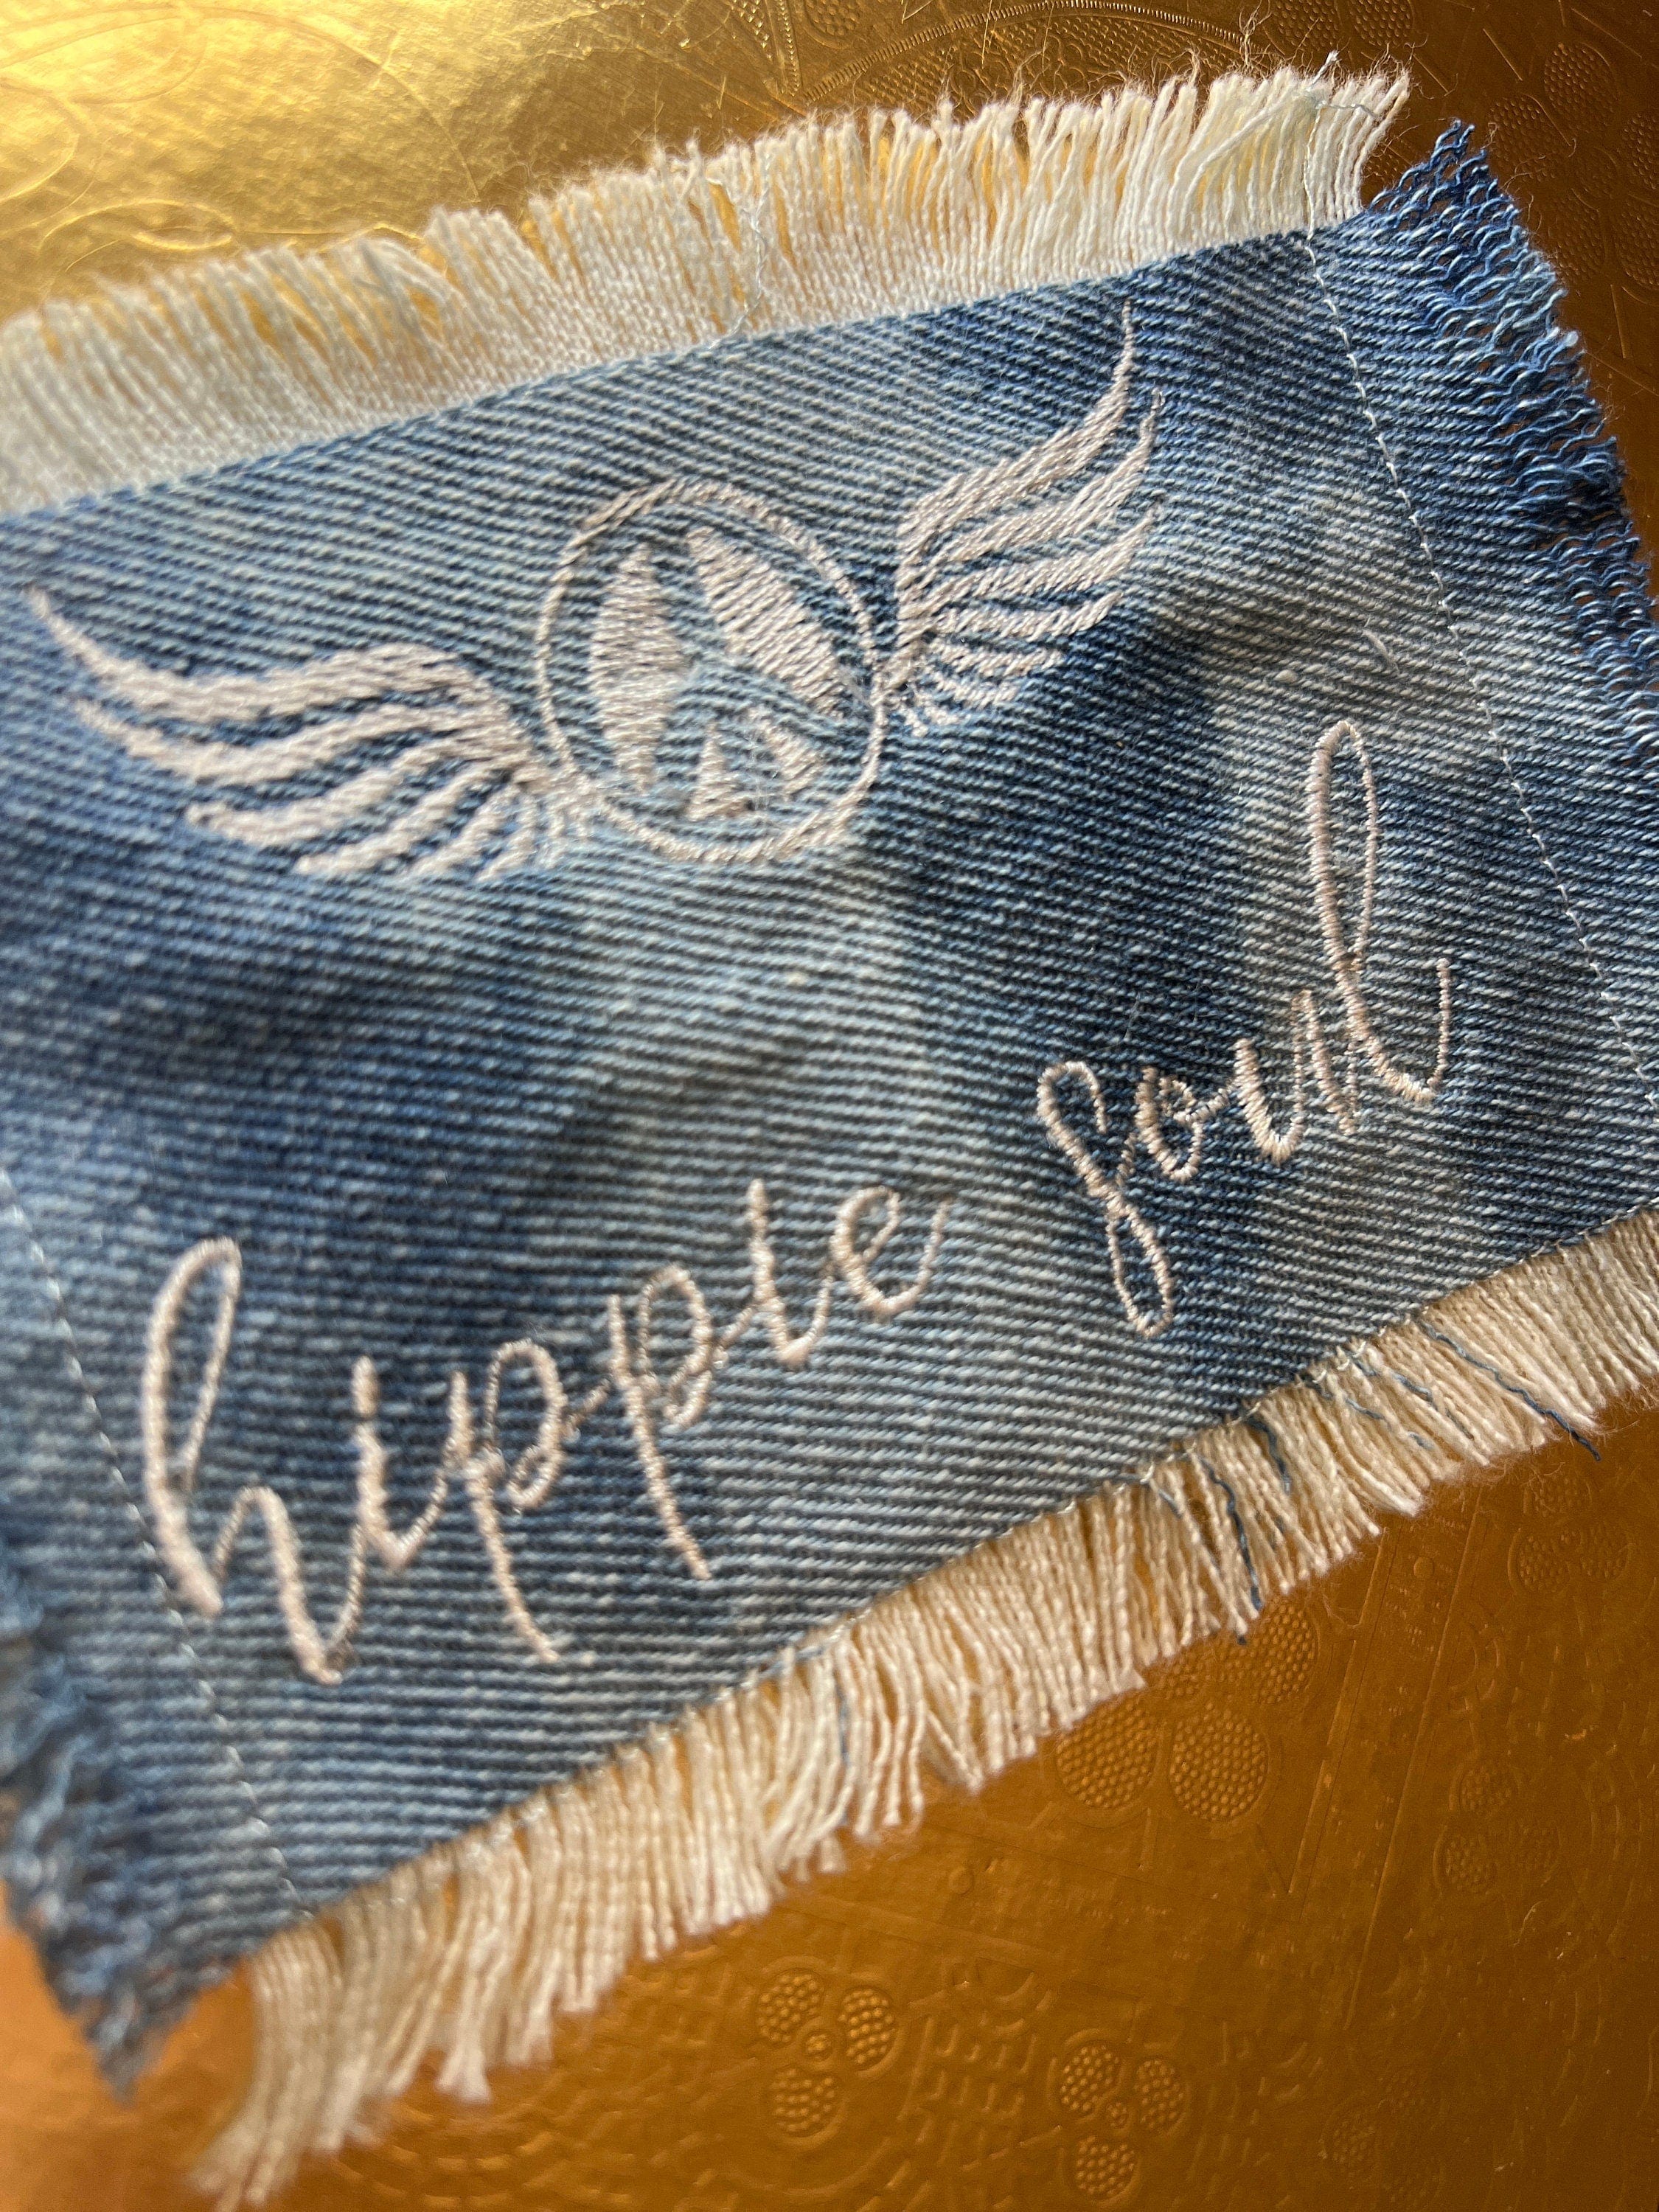 Embroidered HIPPIE SOUL PATCH art Bleached Denim Iron On little hippie fringed frayed Hippy Soule Peace Wings decal hot pink red blue white Appliques & Patches